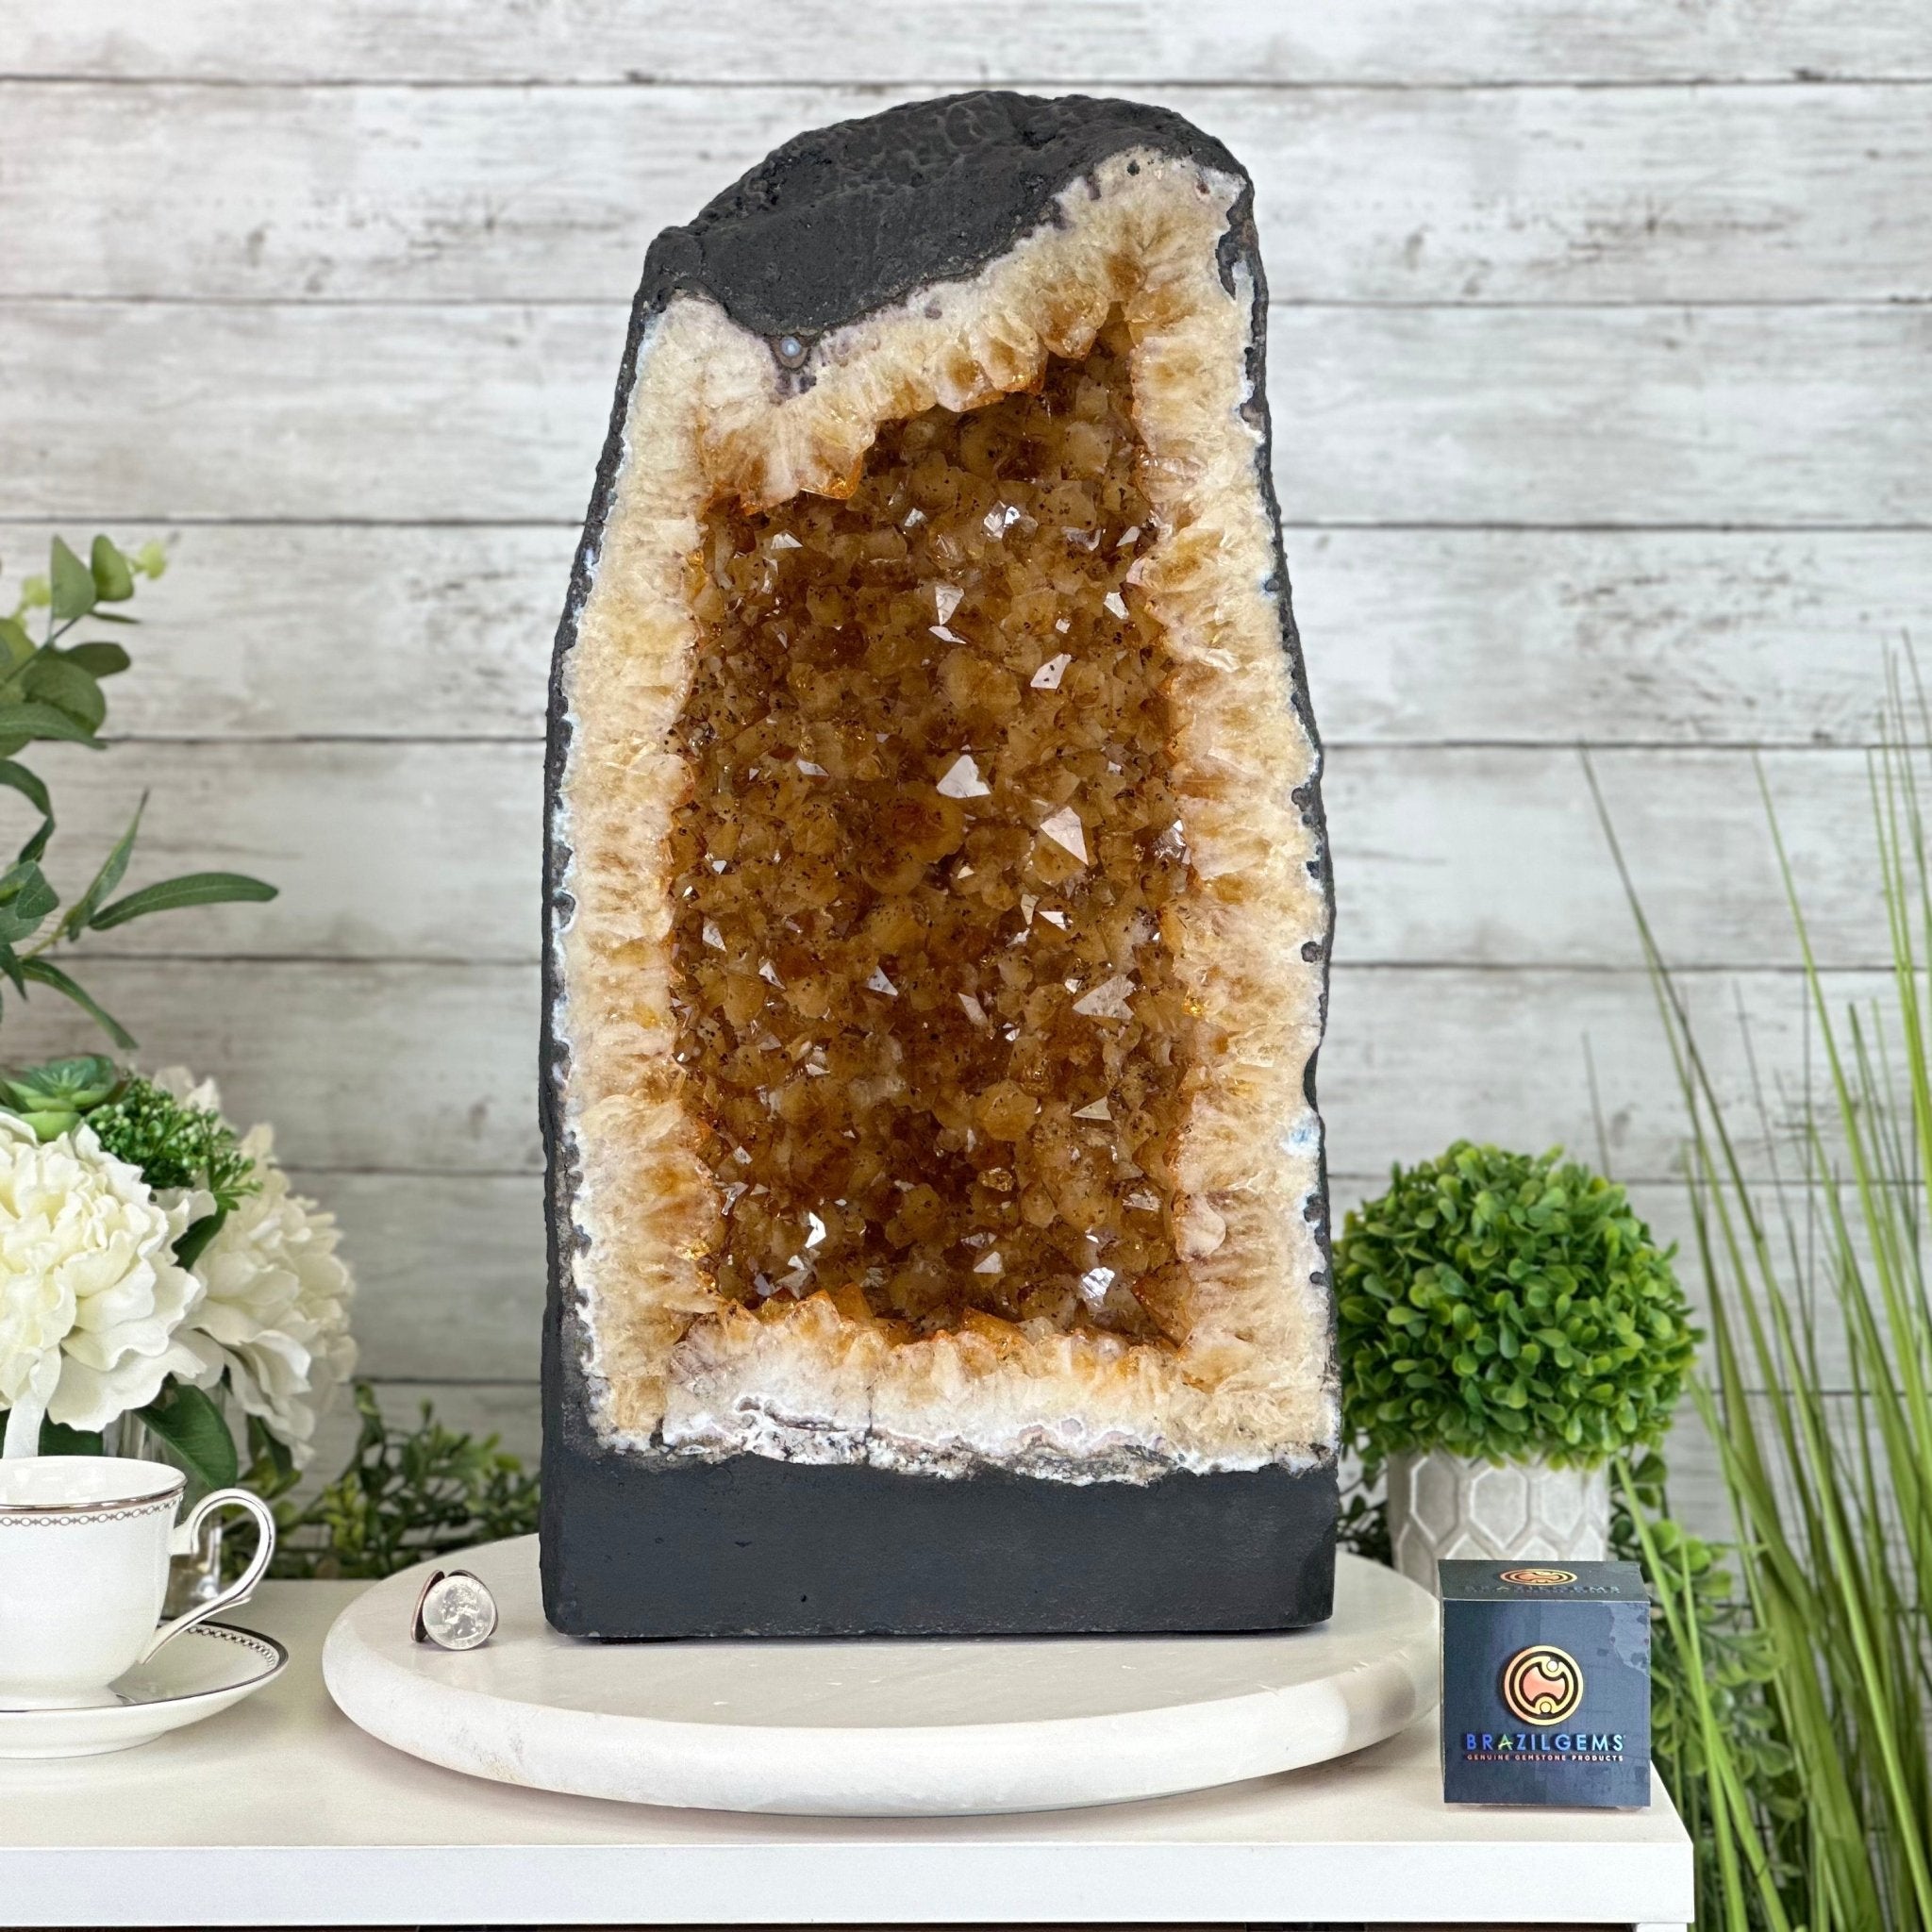 Extra Quality Citrine Cathedral, 71.4 lbs & 19.8" Tall #5603-0293 by Brazil Gems® - Brazil GemsBrazil GemsExtra Quality Citrine Cathedral, 71.4 lbs & 19.8" Tall #5603-0293 by Brazil Gems®Cathedrals5603-0293